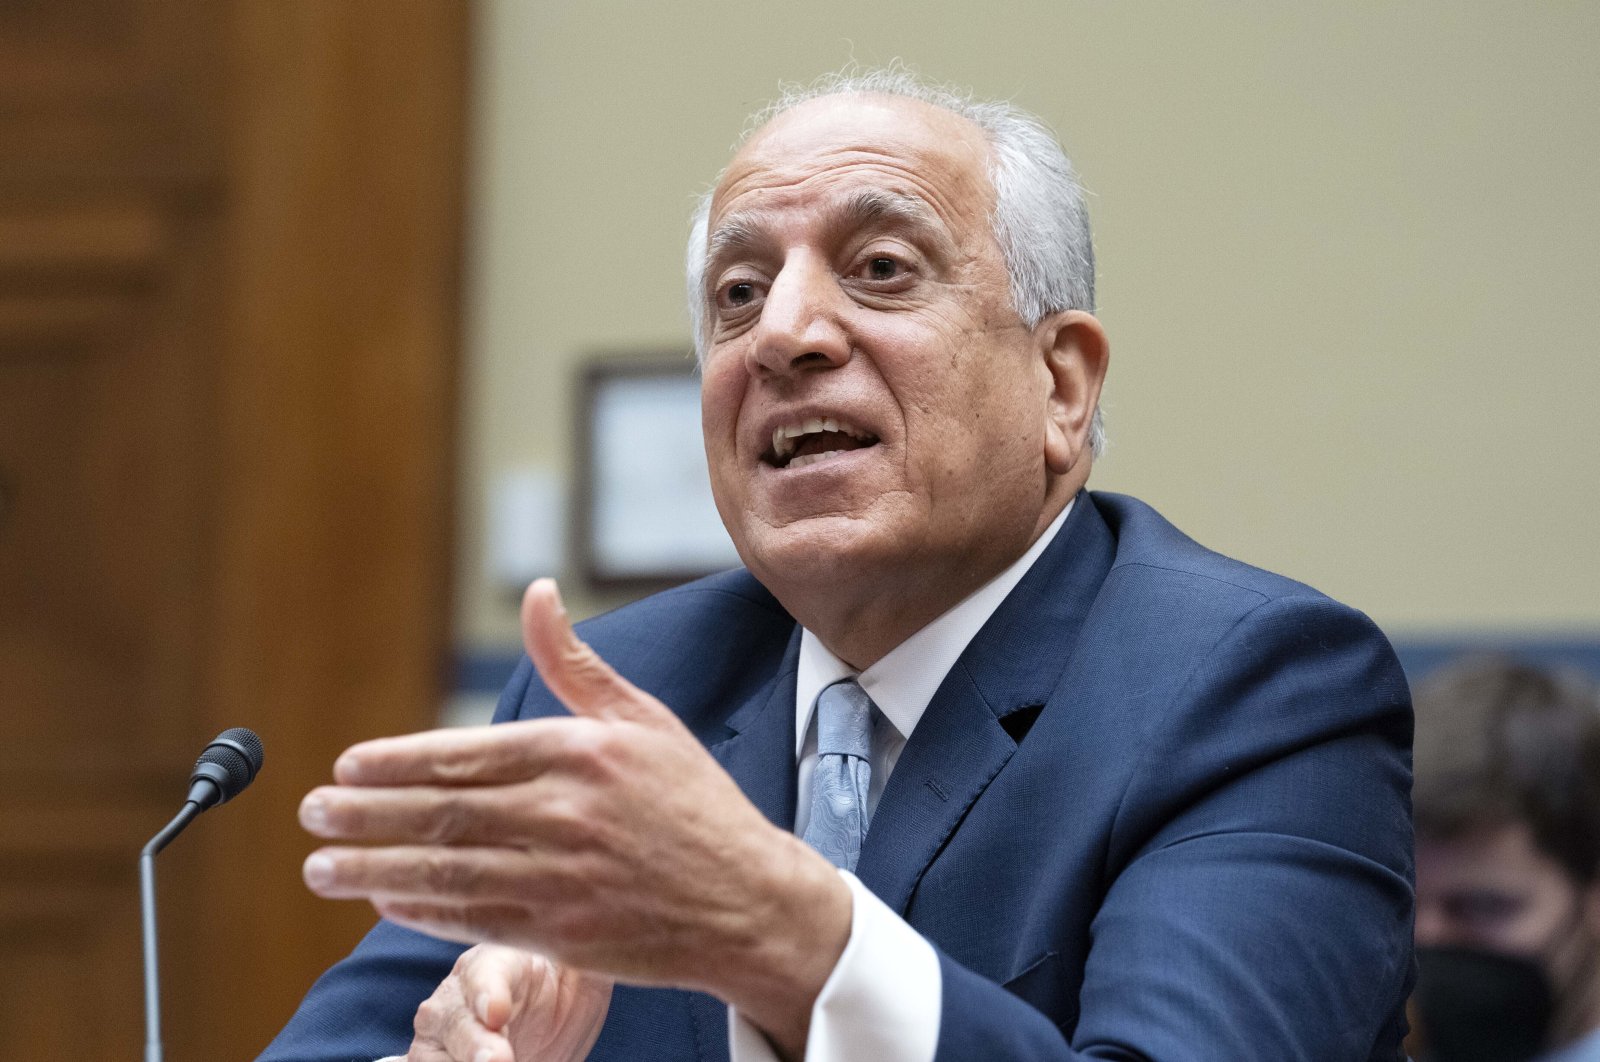 Special Representative for Afghanistan Zalmay Khalilzad speaks during a hearing on Capitol Hill in Washington, D.C., U.S., May 20, 2021. (AP Photo)